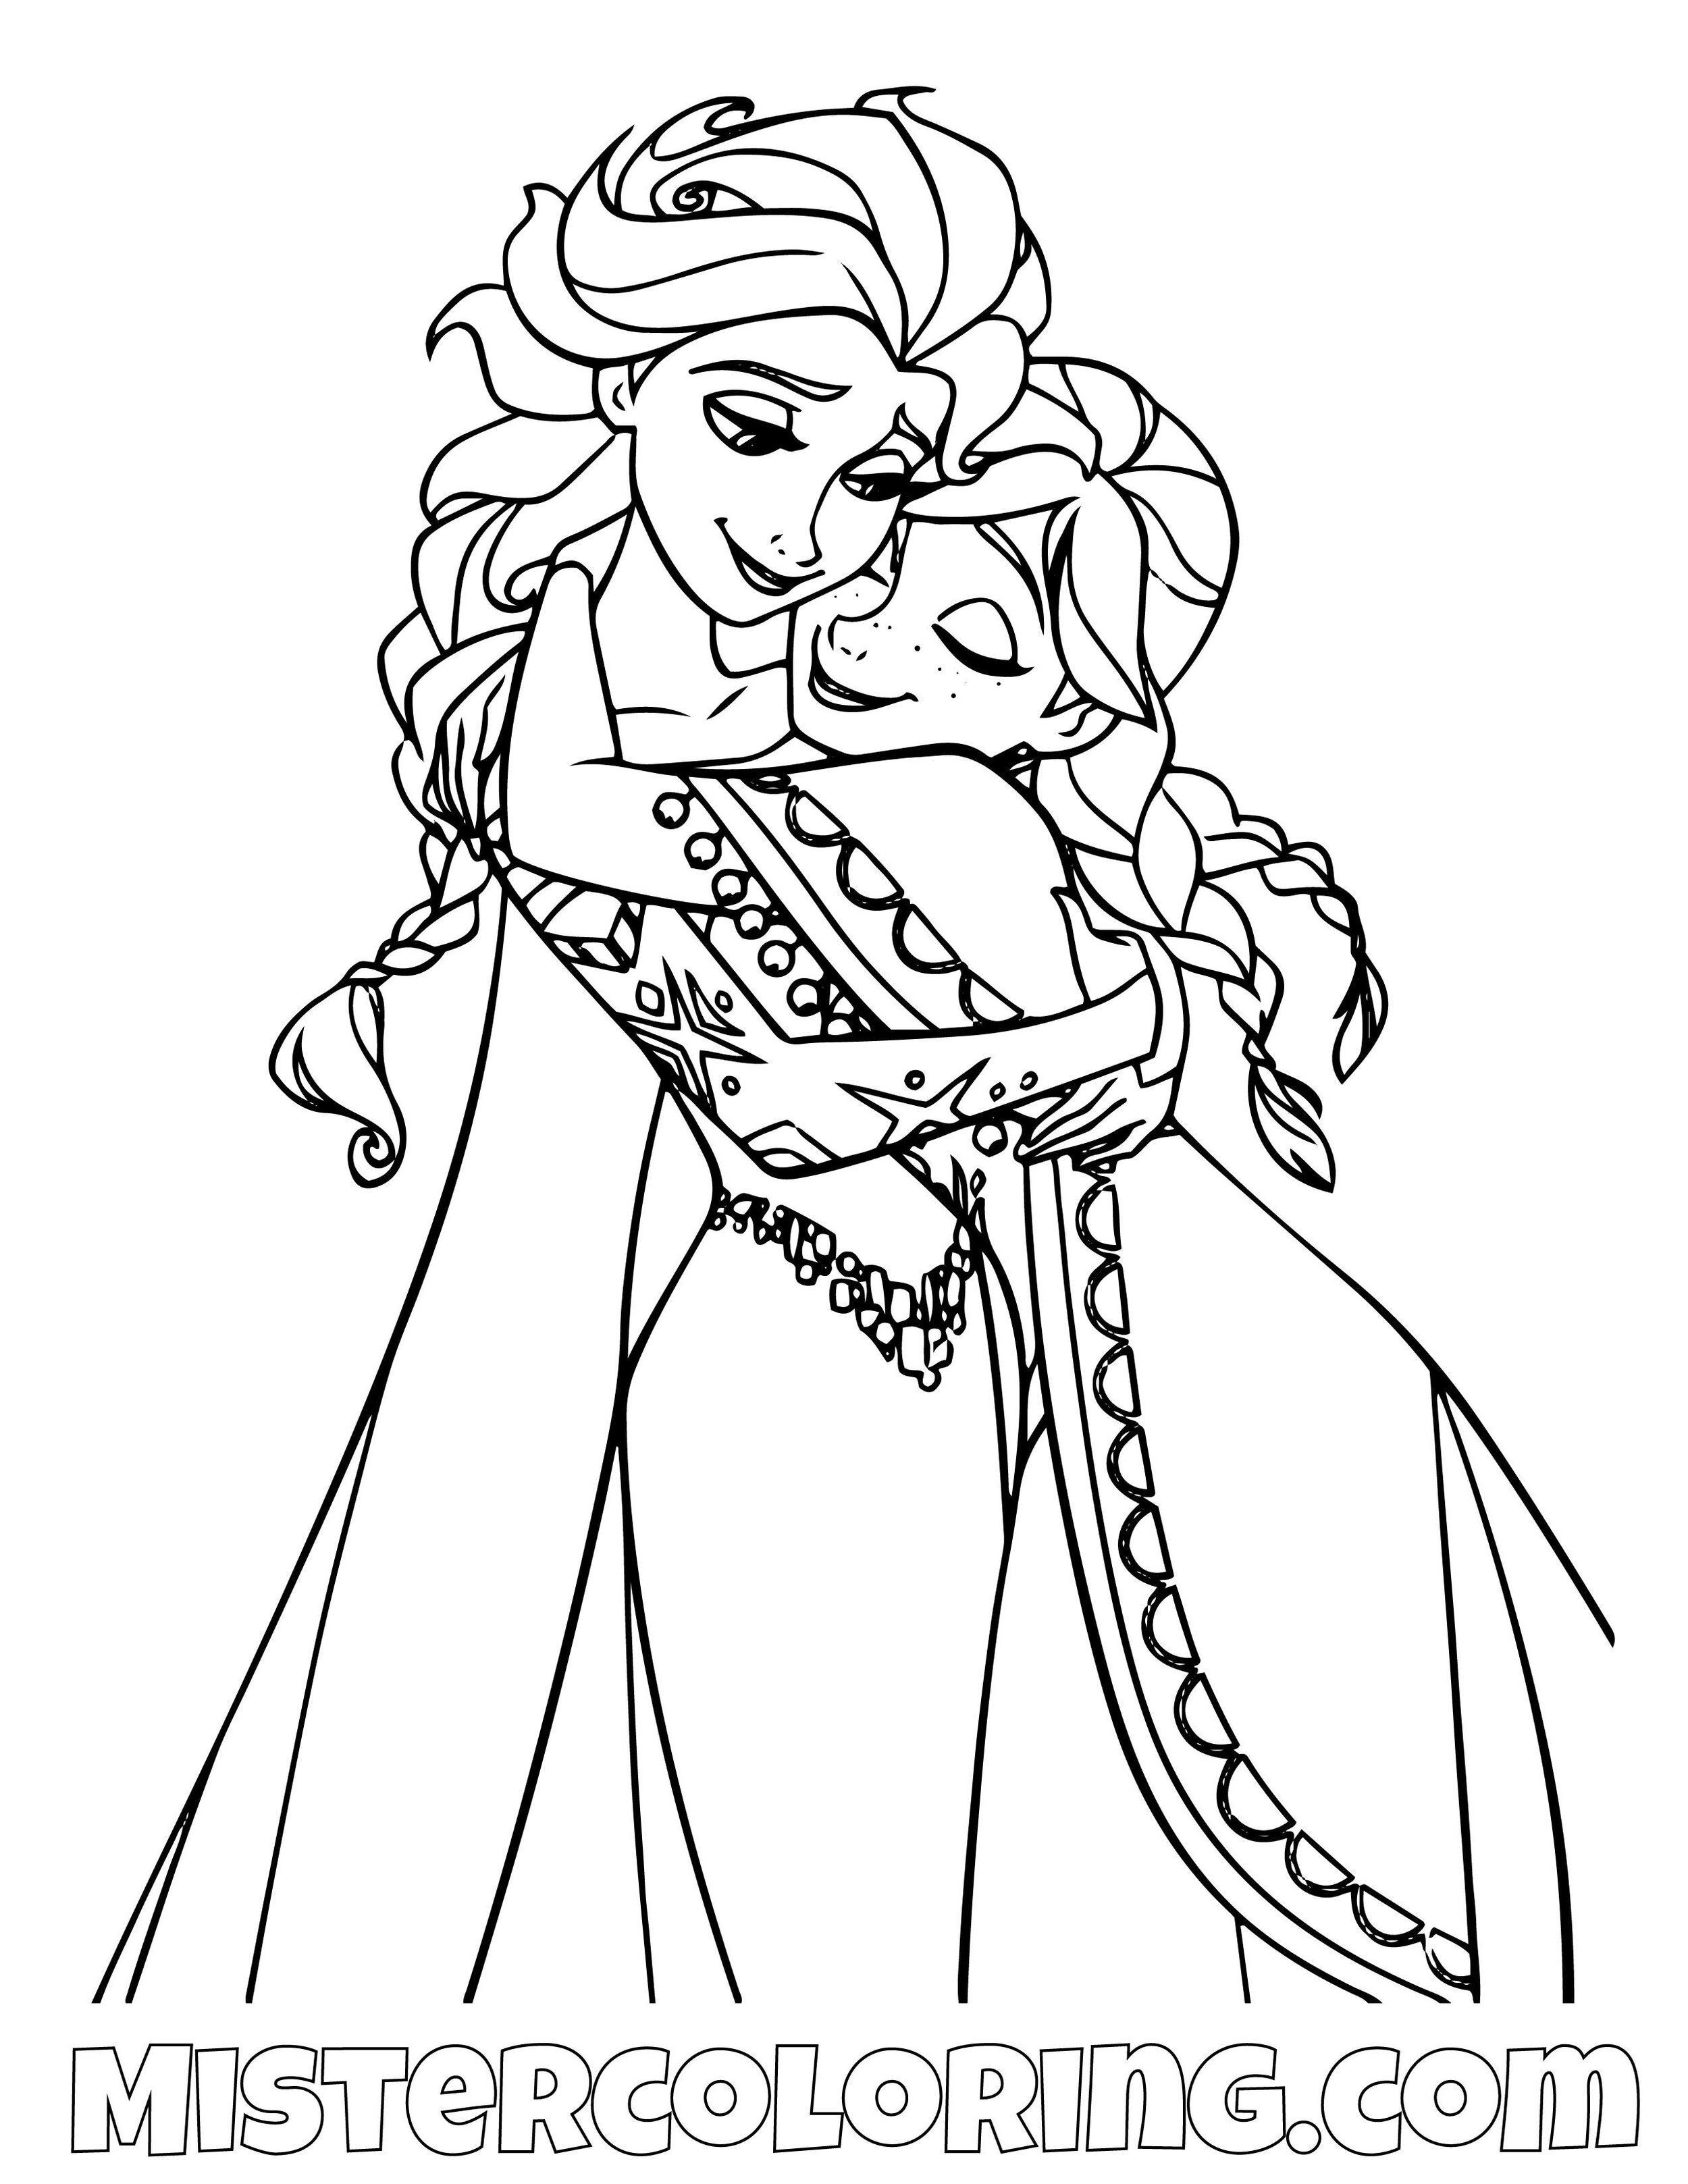 Frozen 2 Coloring Pages For Kids Mister Coloring